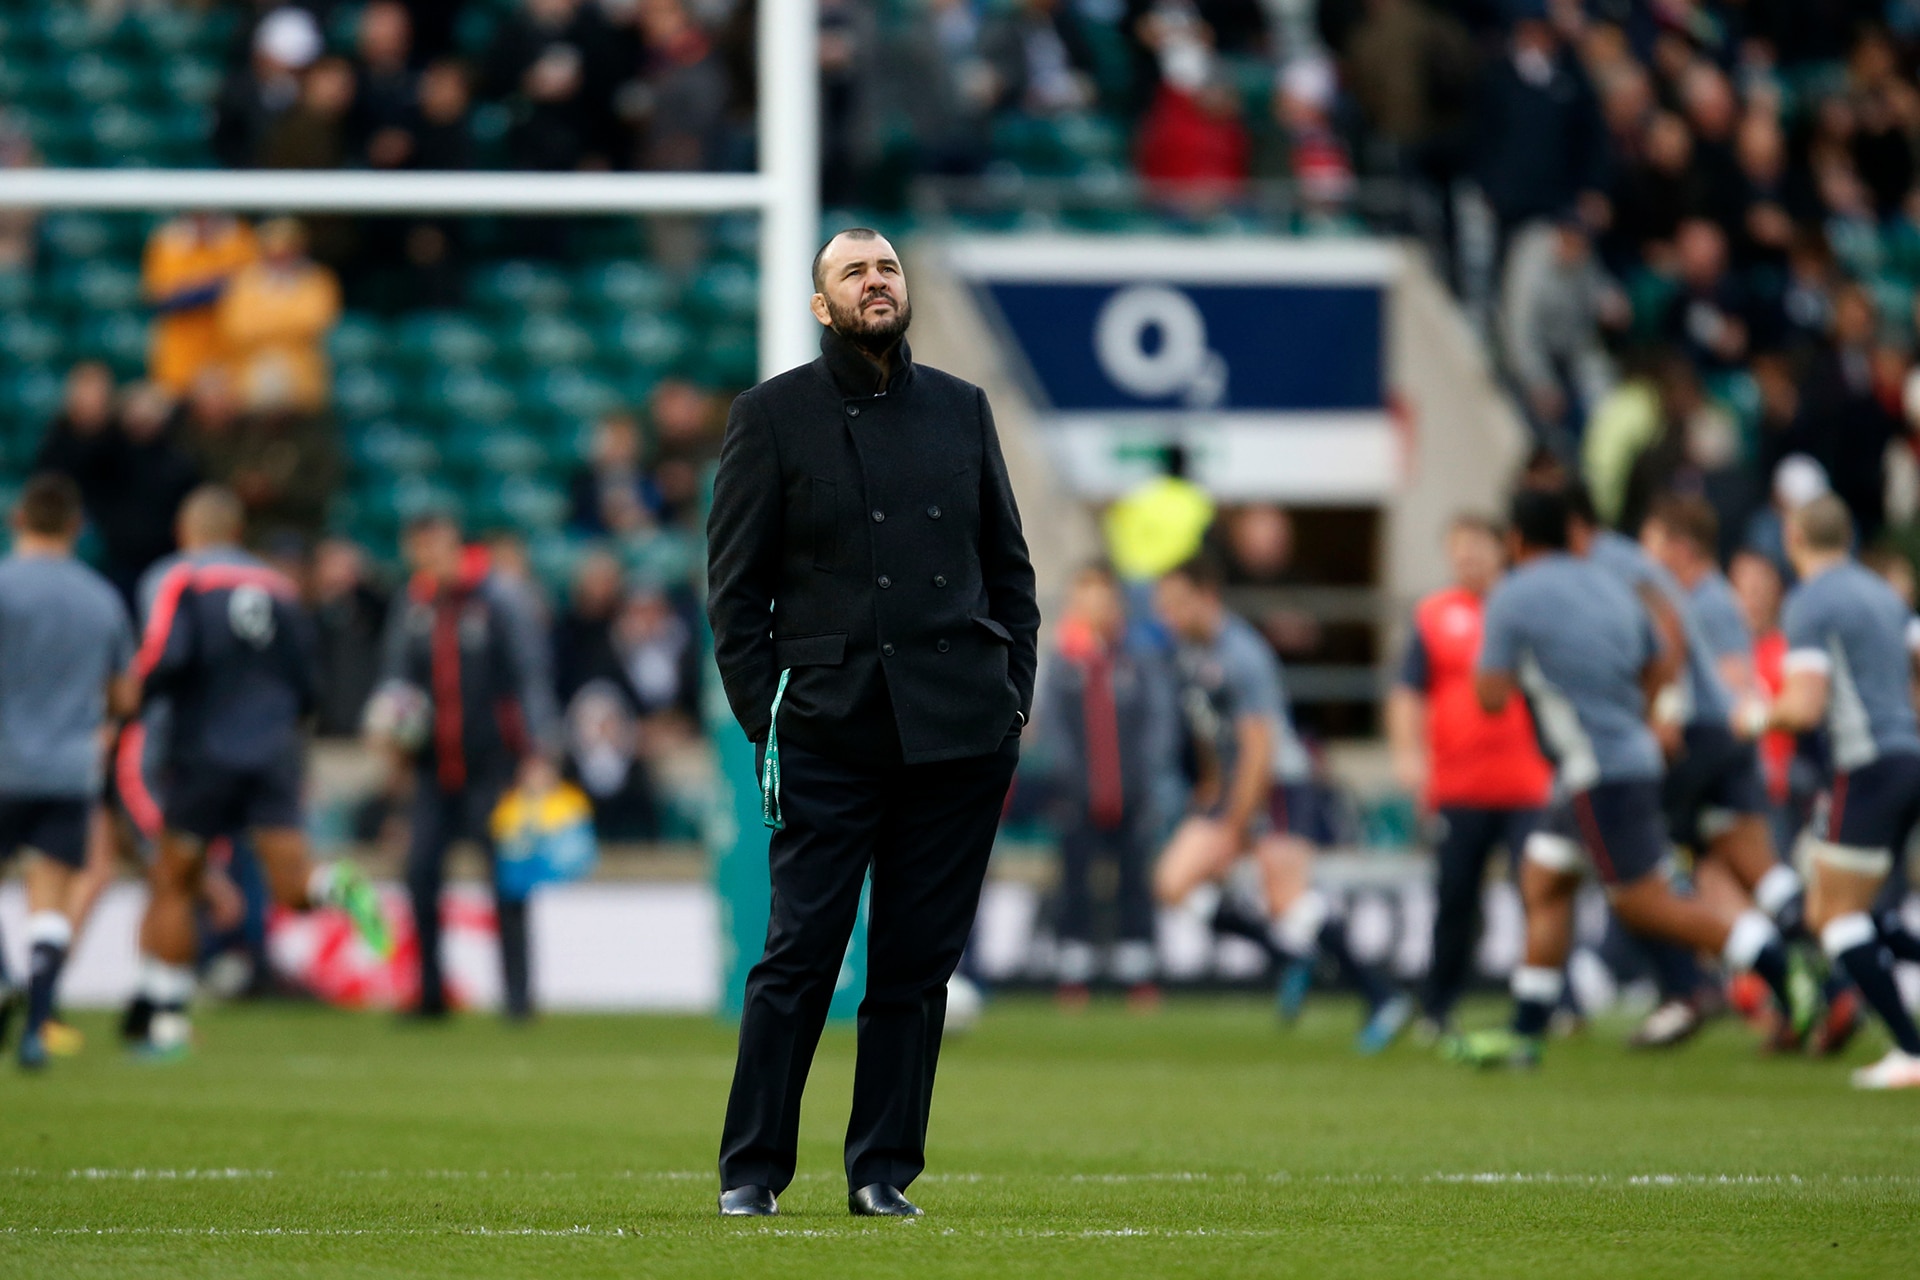 Michael Cheika On Folau, The Wallabies World Cup Hopes, And Harnessing Your Inner Fire For Good